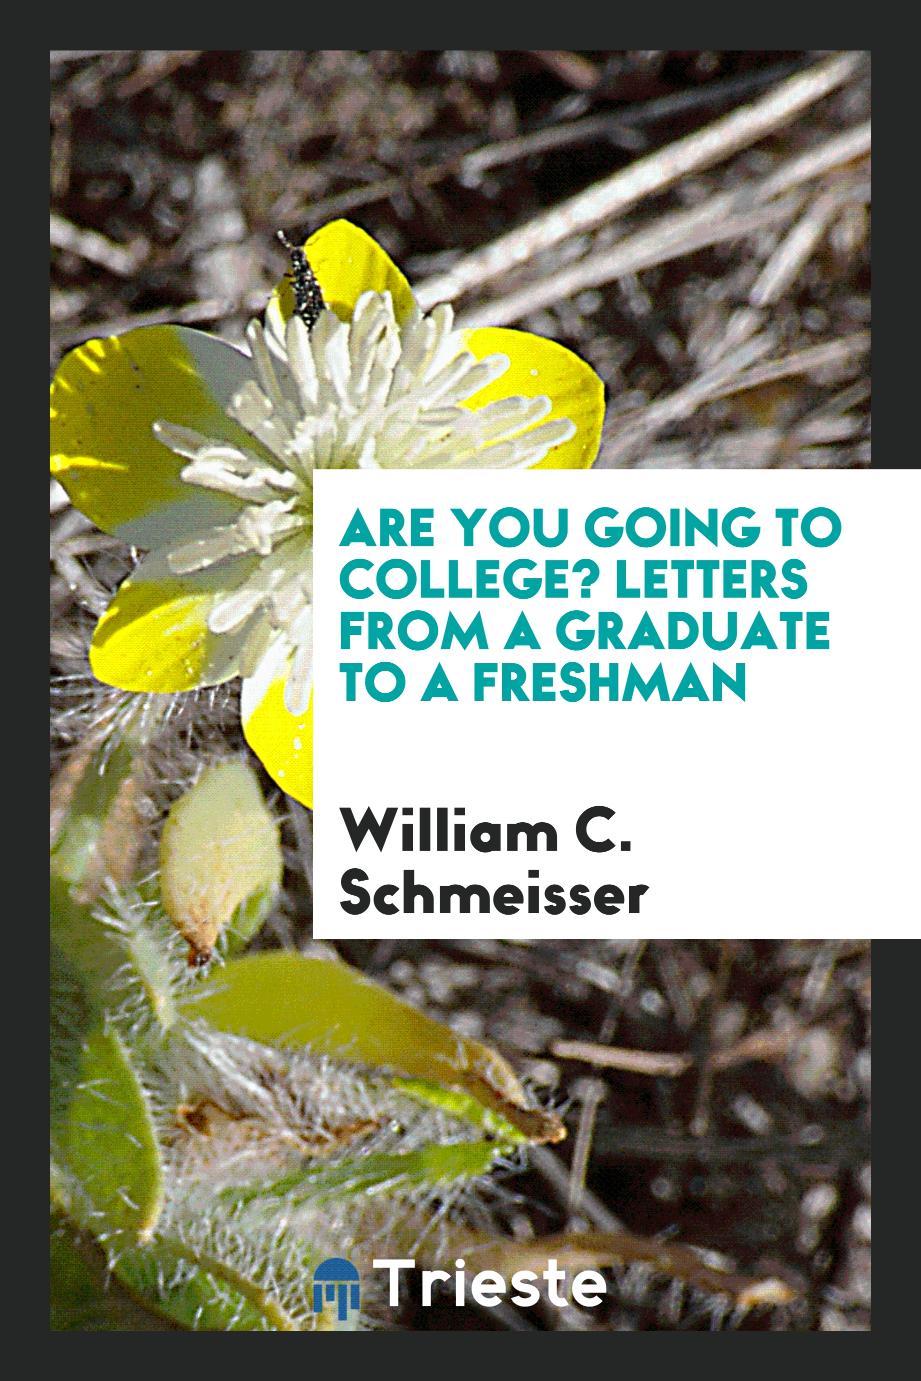 Are you going to college? Letters from a graduate to a freshman